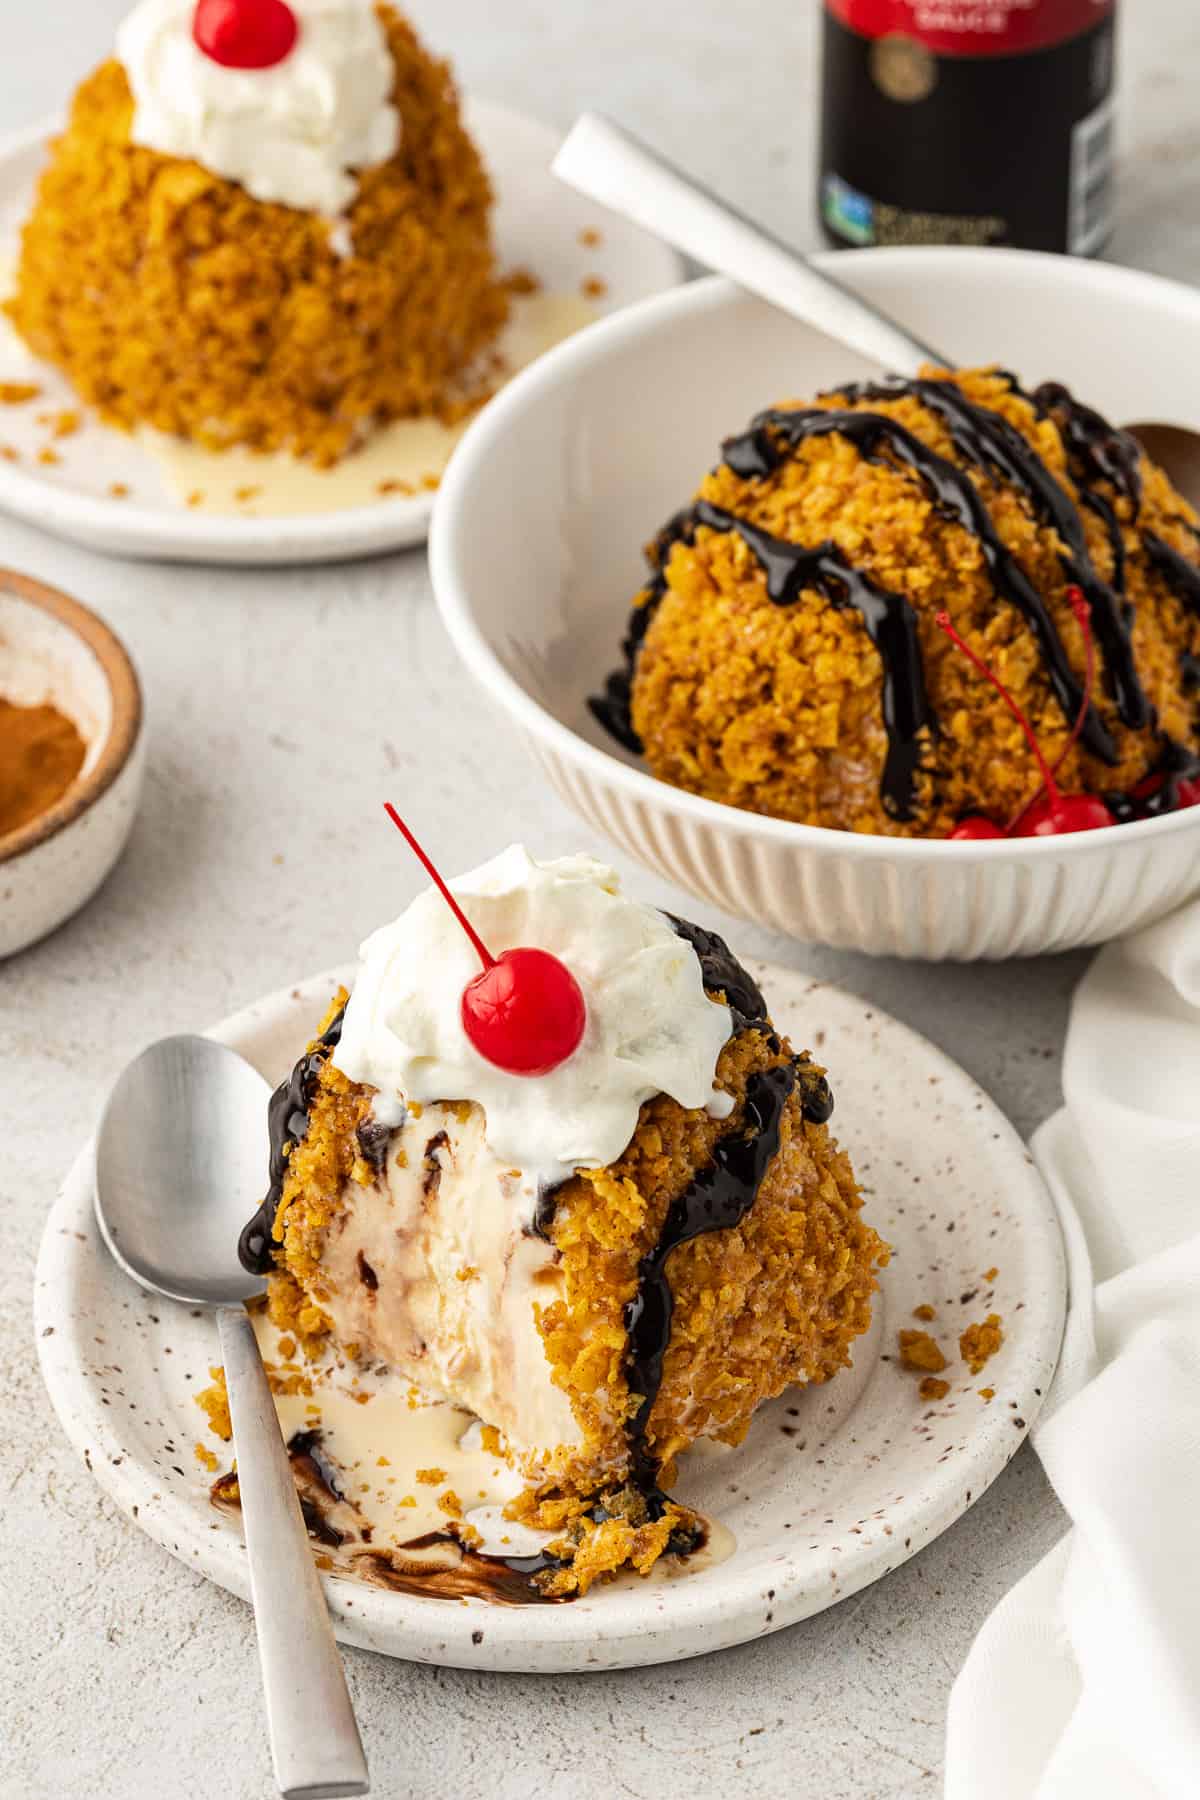 a small plate with fried ice cream partially eaten on it with a spoon, beside a bowl with another ball of fried ice cream, a white towel, and a plate with another ice cream ball in the background